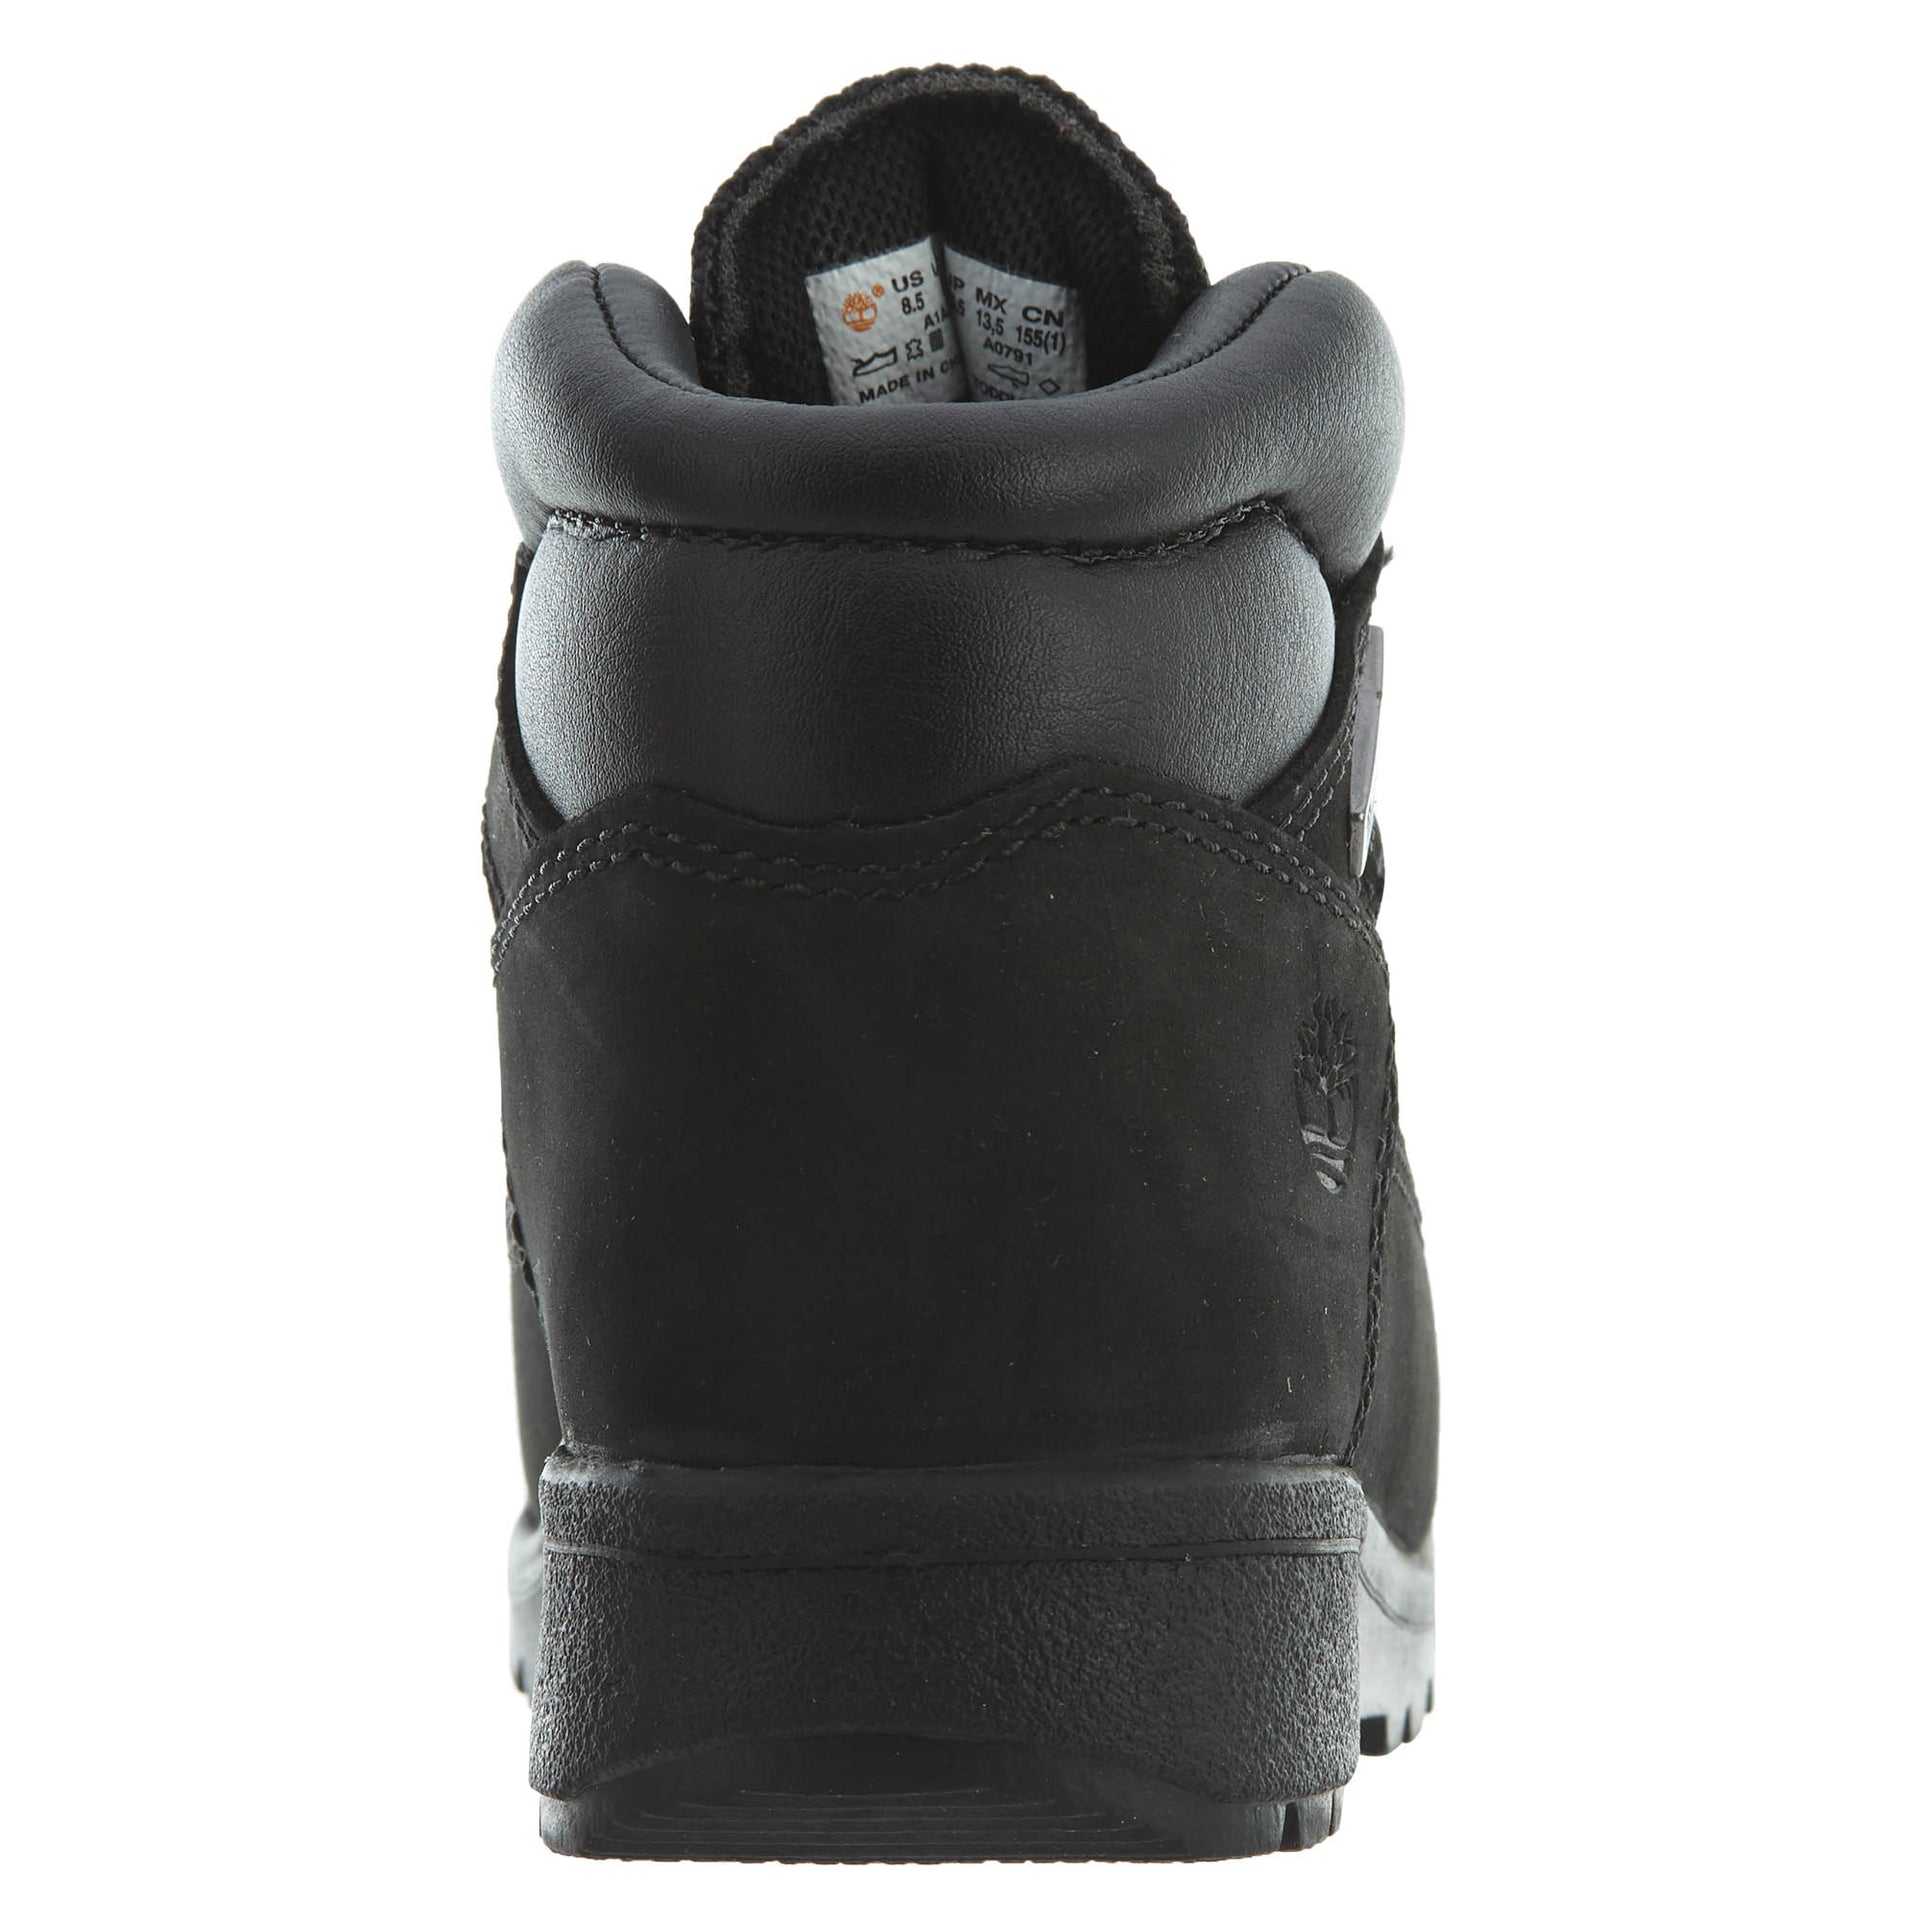 Timberland Field Boots Toddlers Style : Tb0a1adb